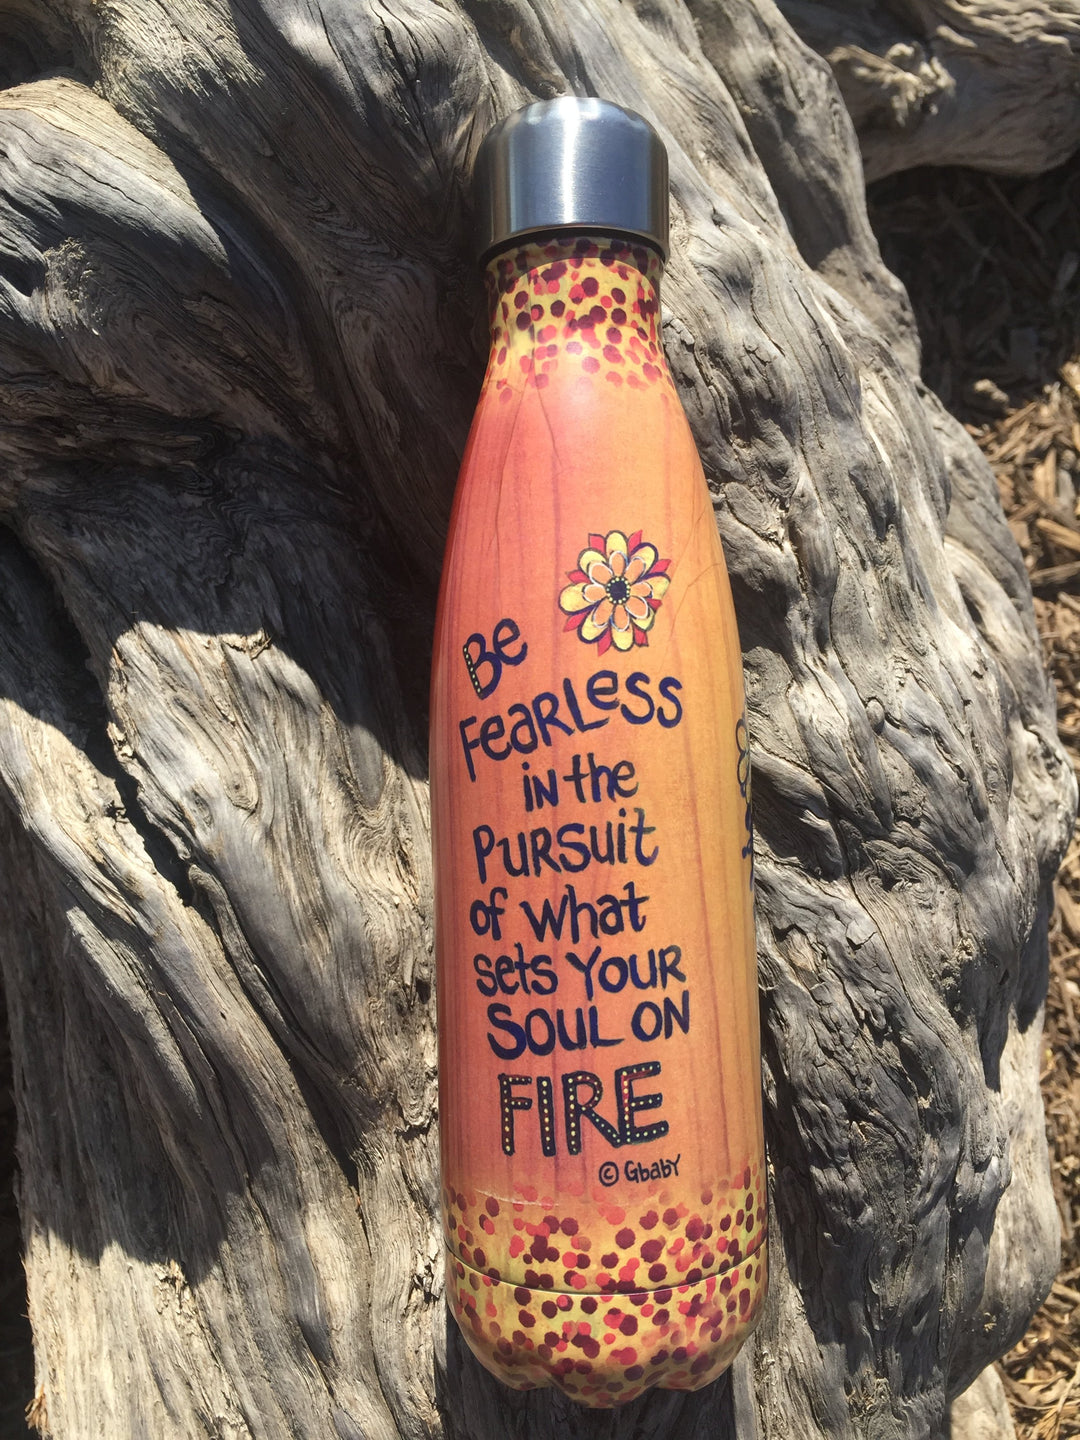 Soul on Fire: African American Stainless Steel Bottle by Sylvia "Gbaby" Cohen